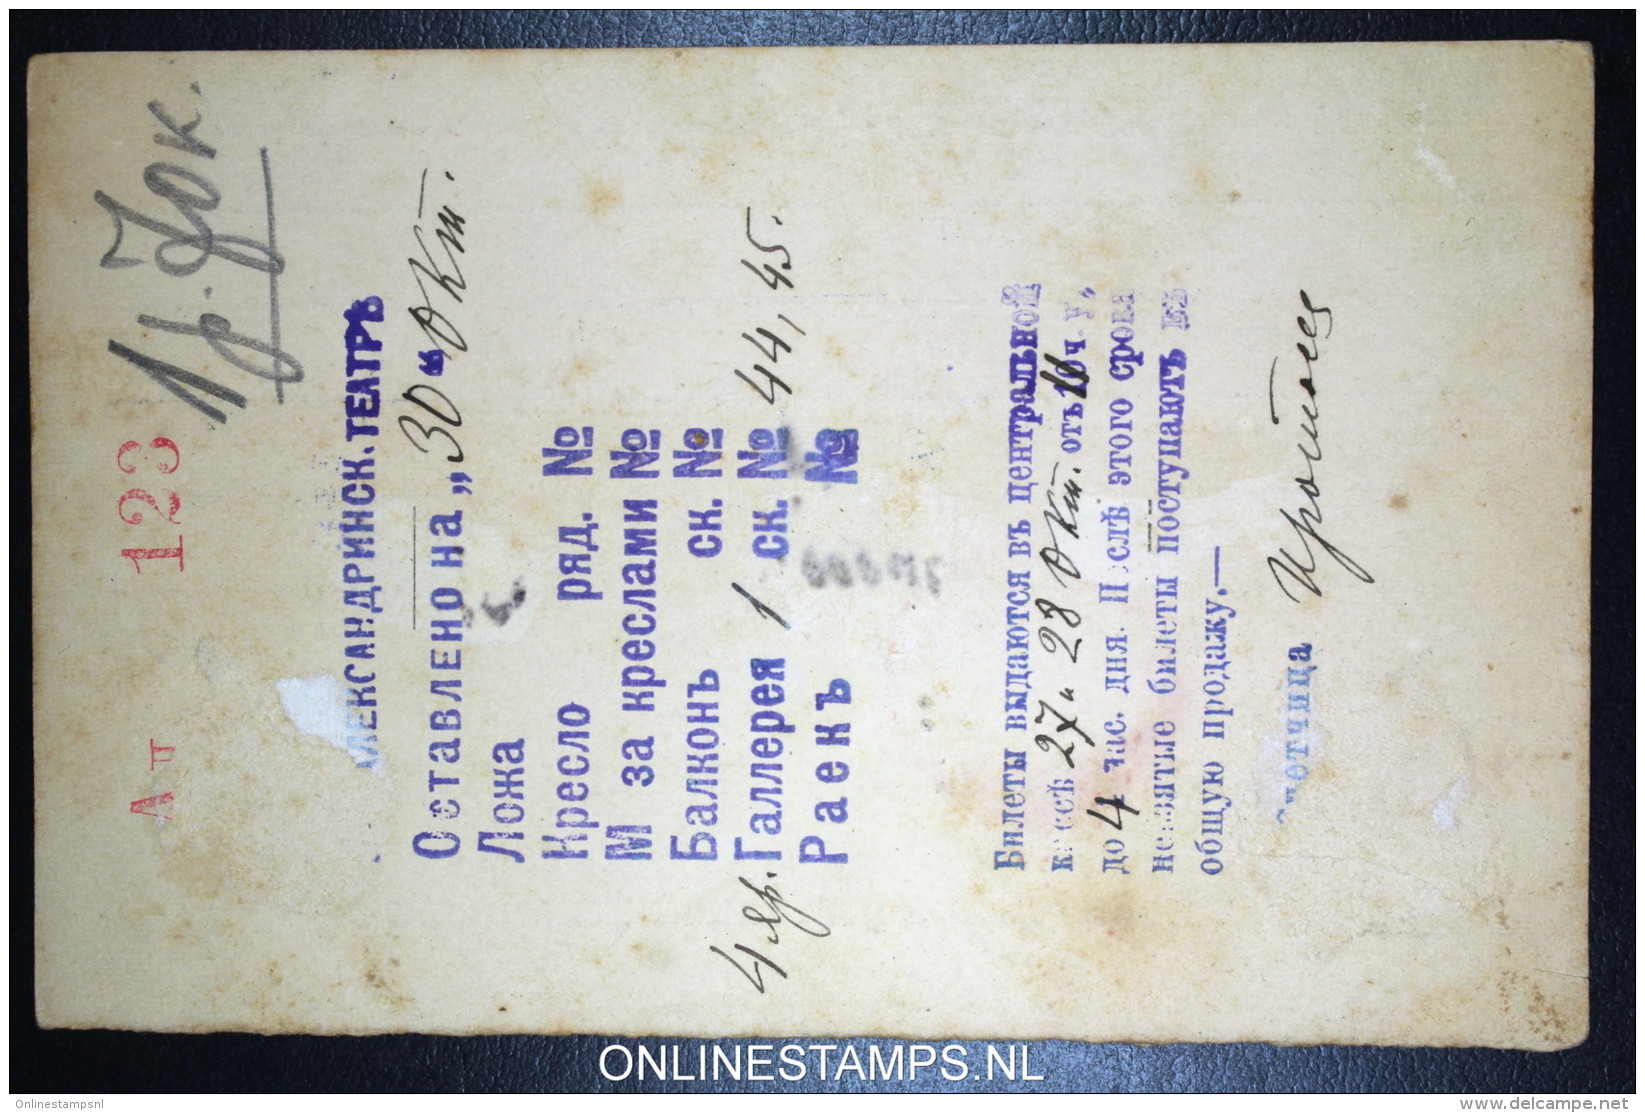 Russia: Postkart  P8a P 8a Used Réponse - Stamped Stationery